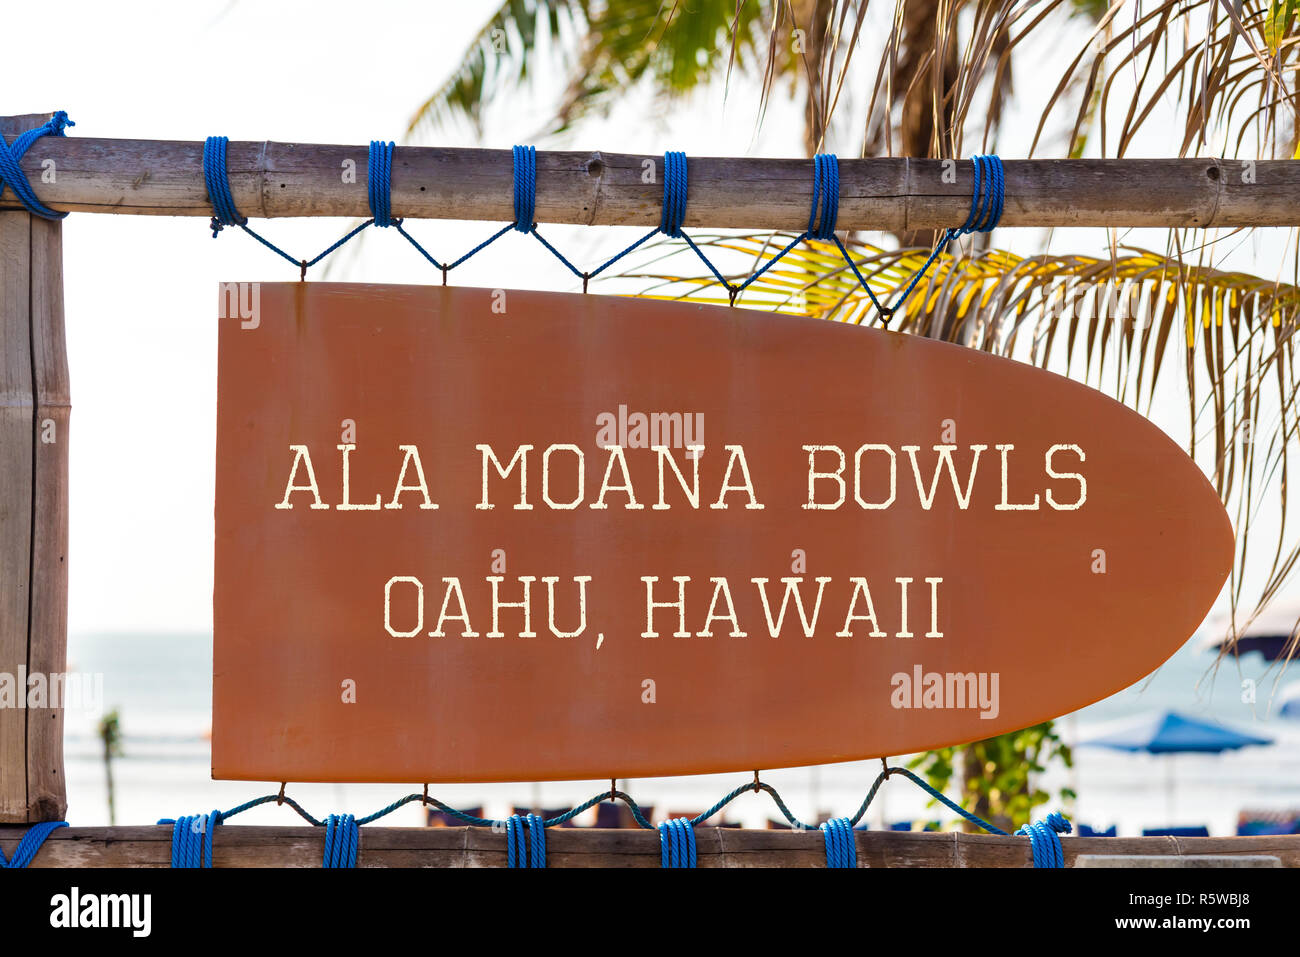 Orange vintage signboard in shape of surfboard with Ala Moana Bowls Oahu, Hawaii text for surf spot and palm tree in background Stock Photo